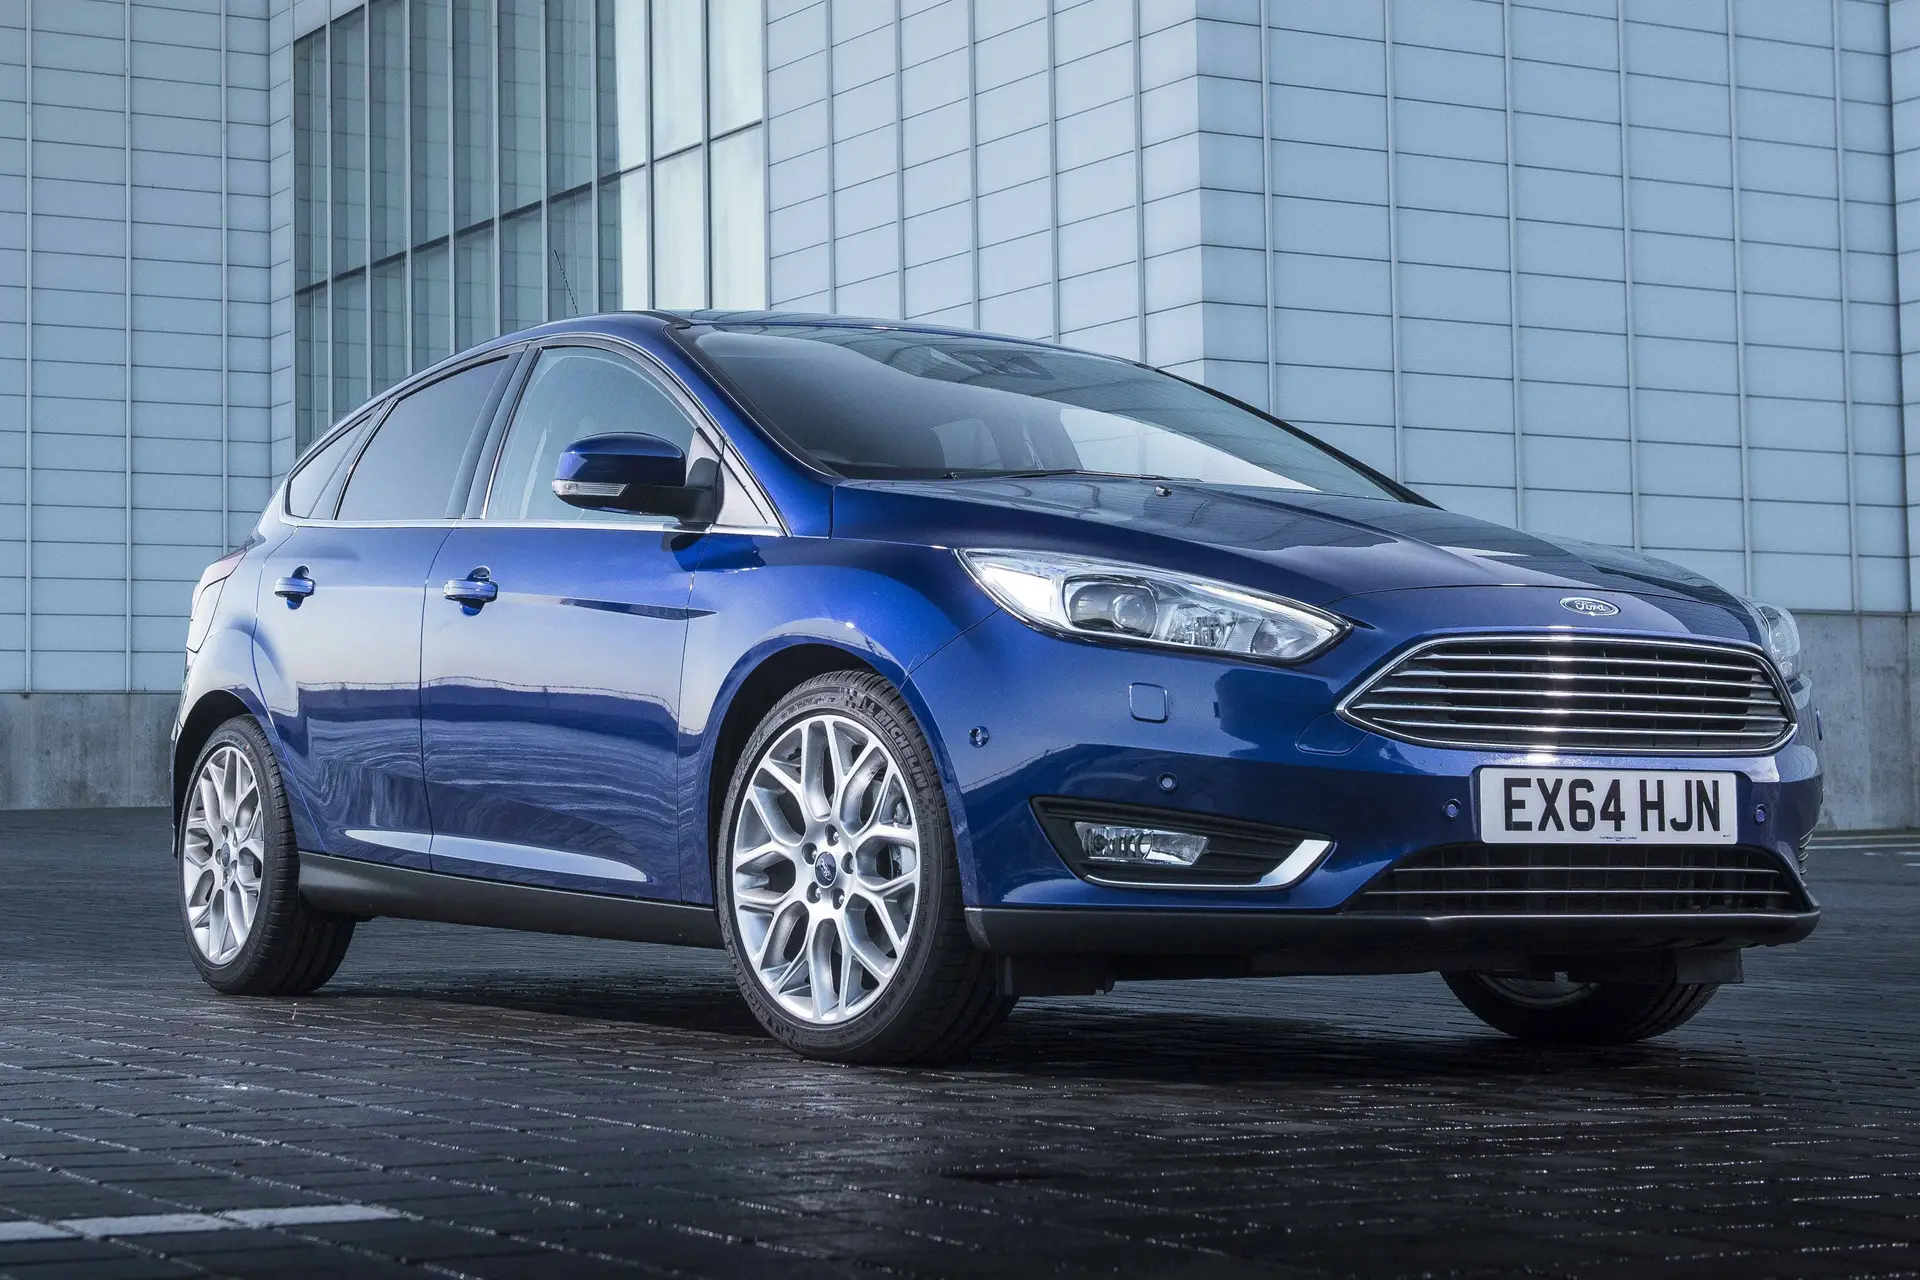 Used Ford Focus Hatchback (2011 - 2018) Review